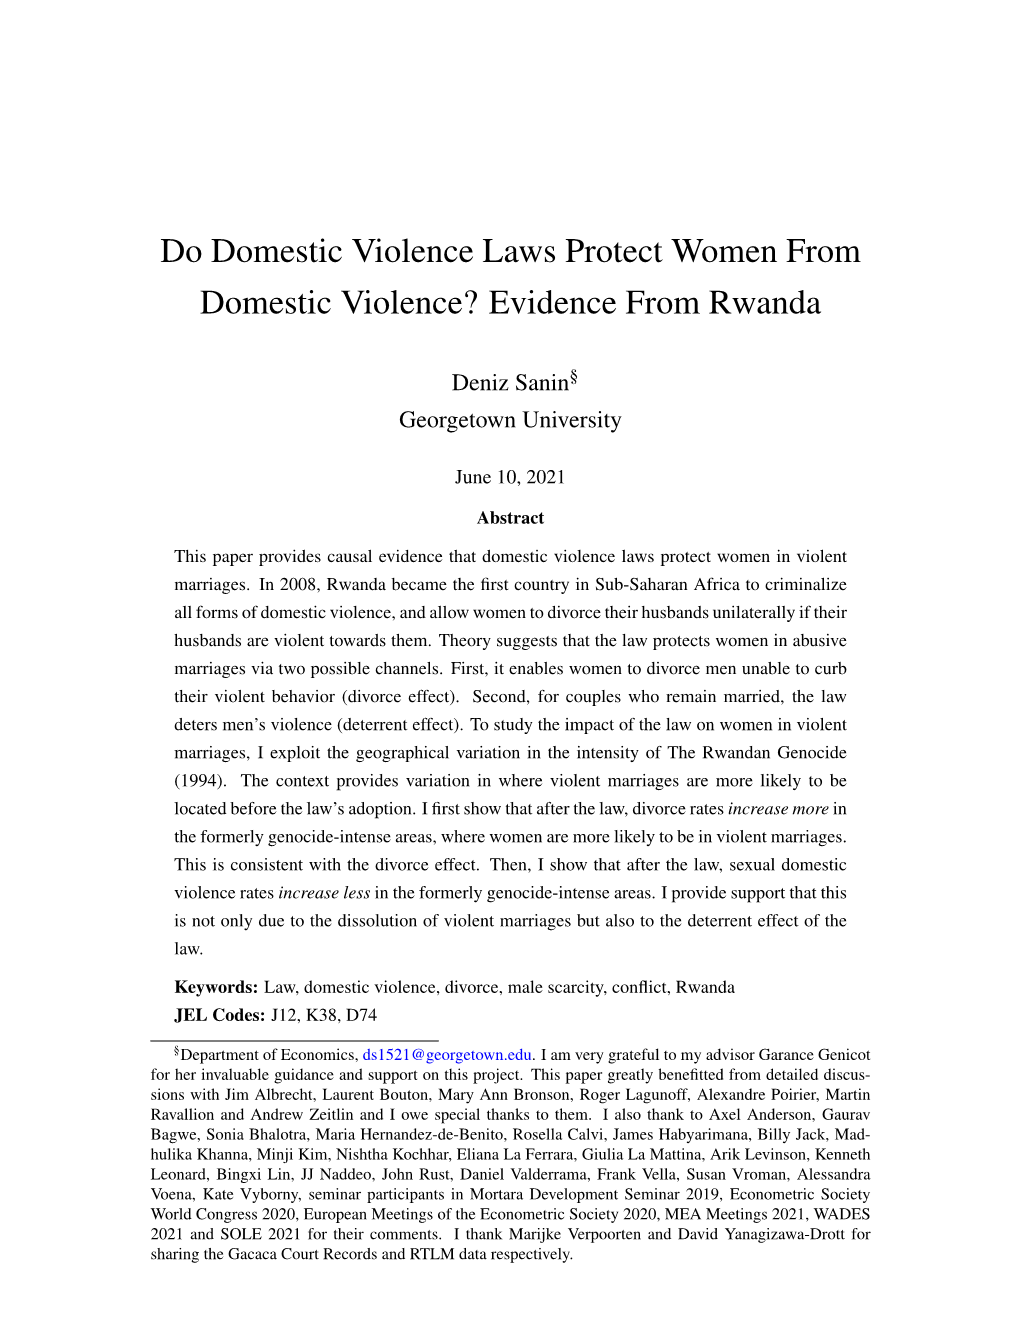 Do Domestic Violence Laws Protect Women from Domestic Violence? Evidence from Rwanda